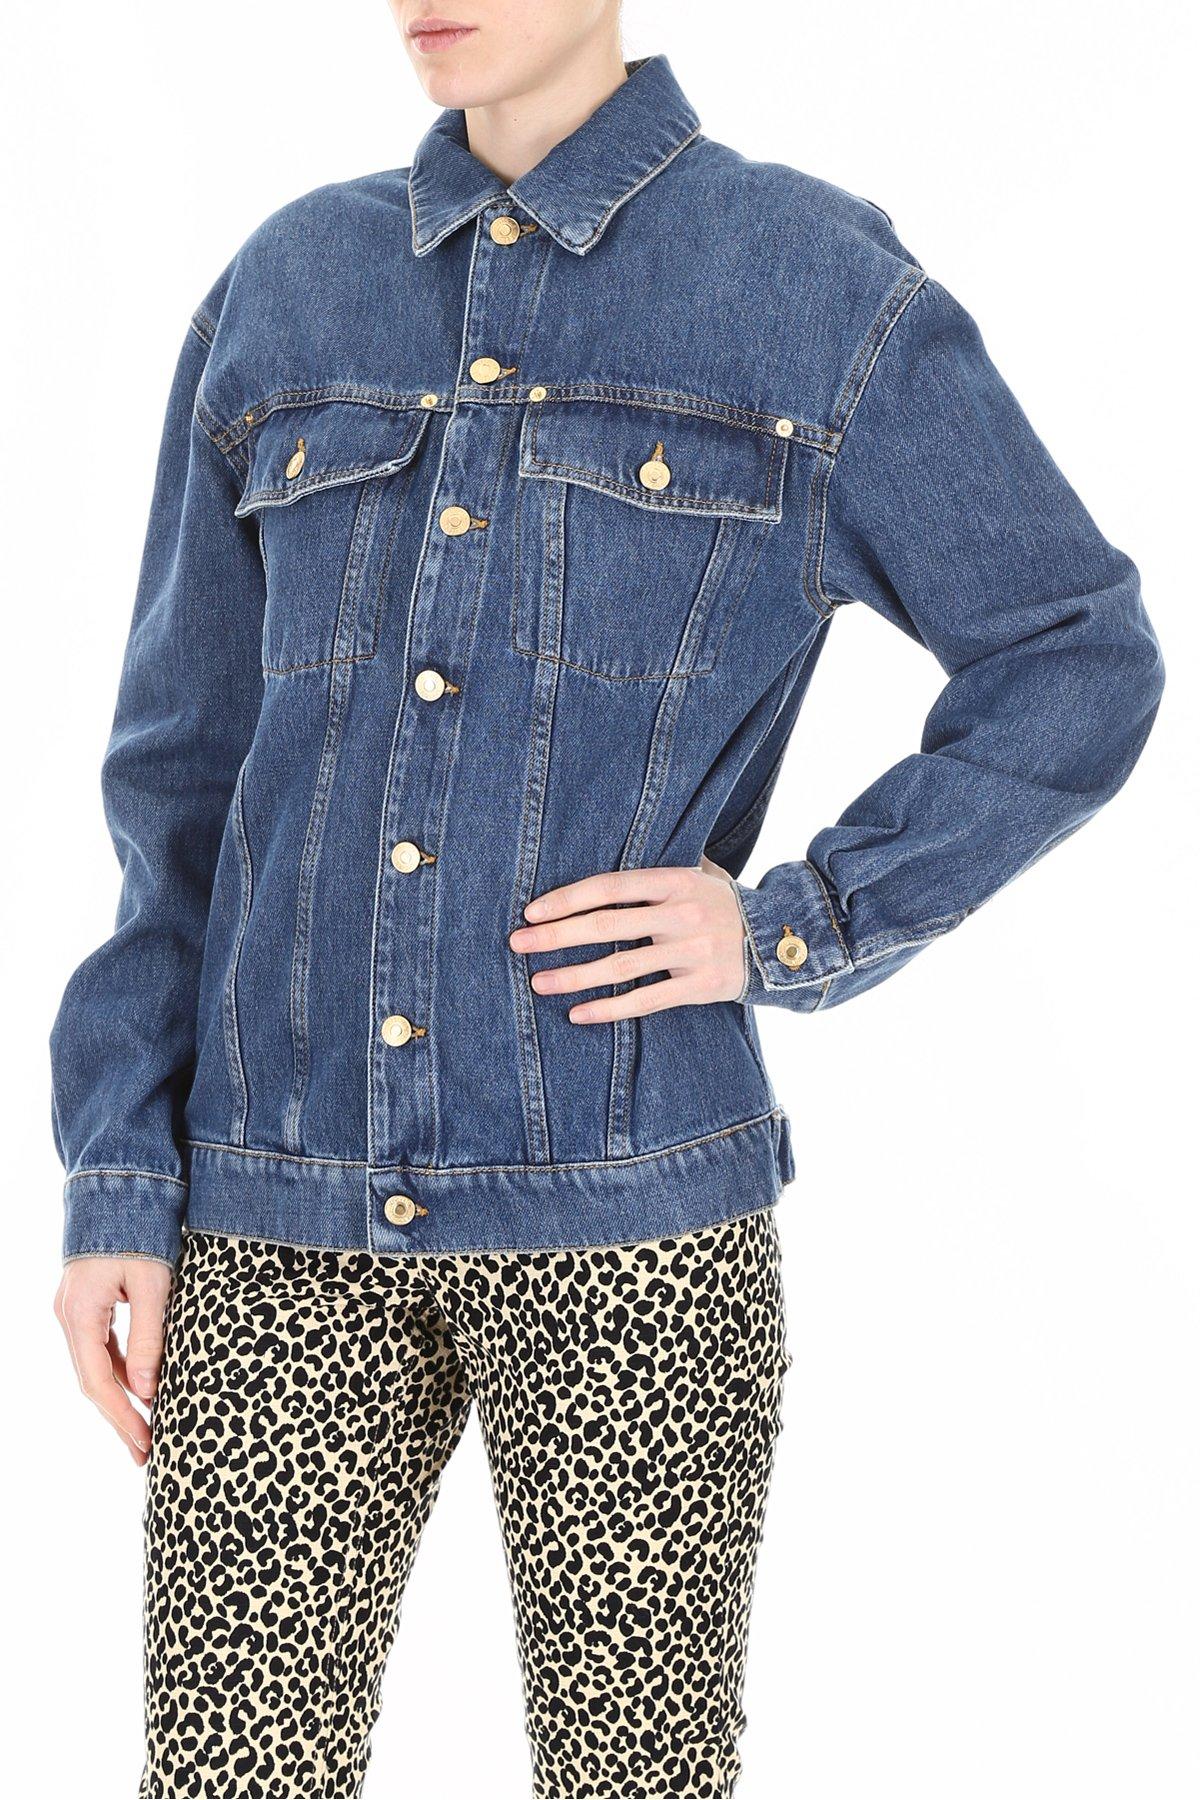 Moschino Denim Jacket With Embroidered Teddy Bear in Blue - Lyst